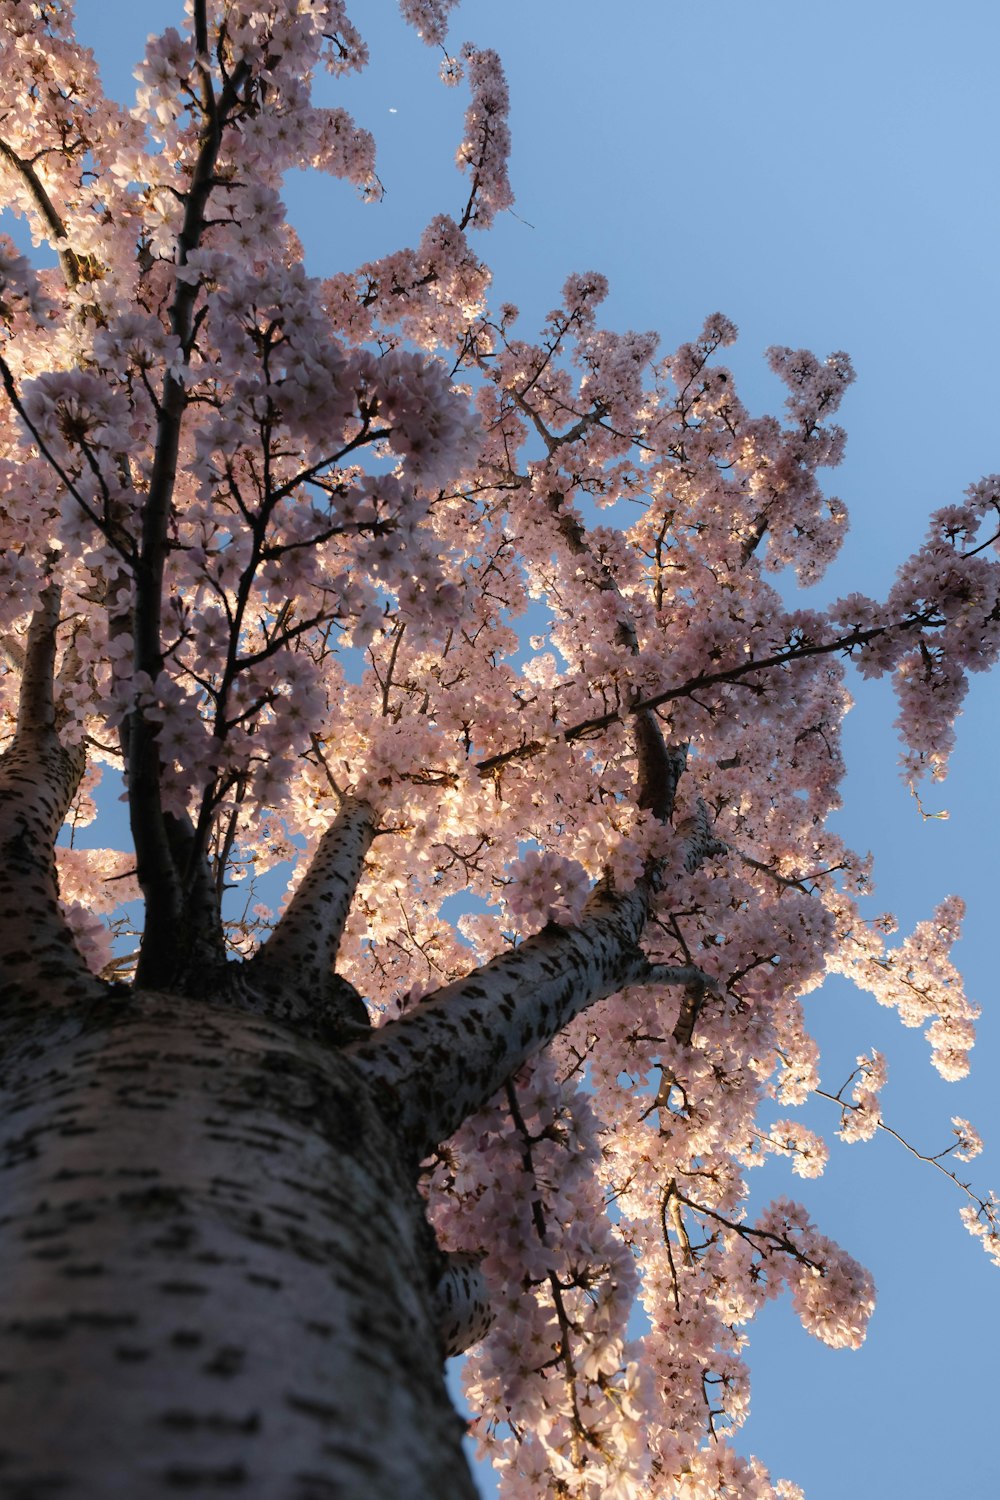 a tall tree with lots of pink flowers on it